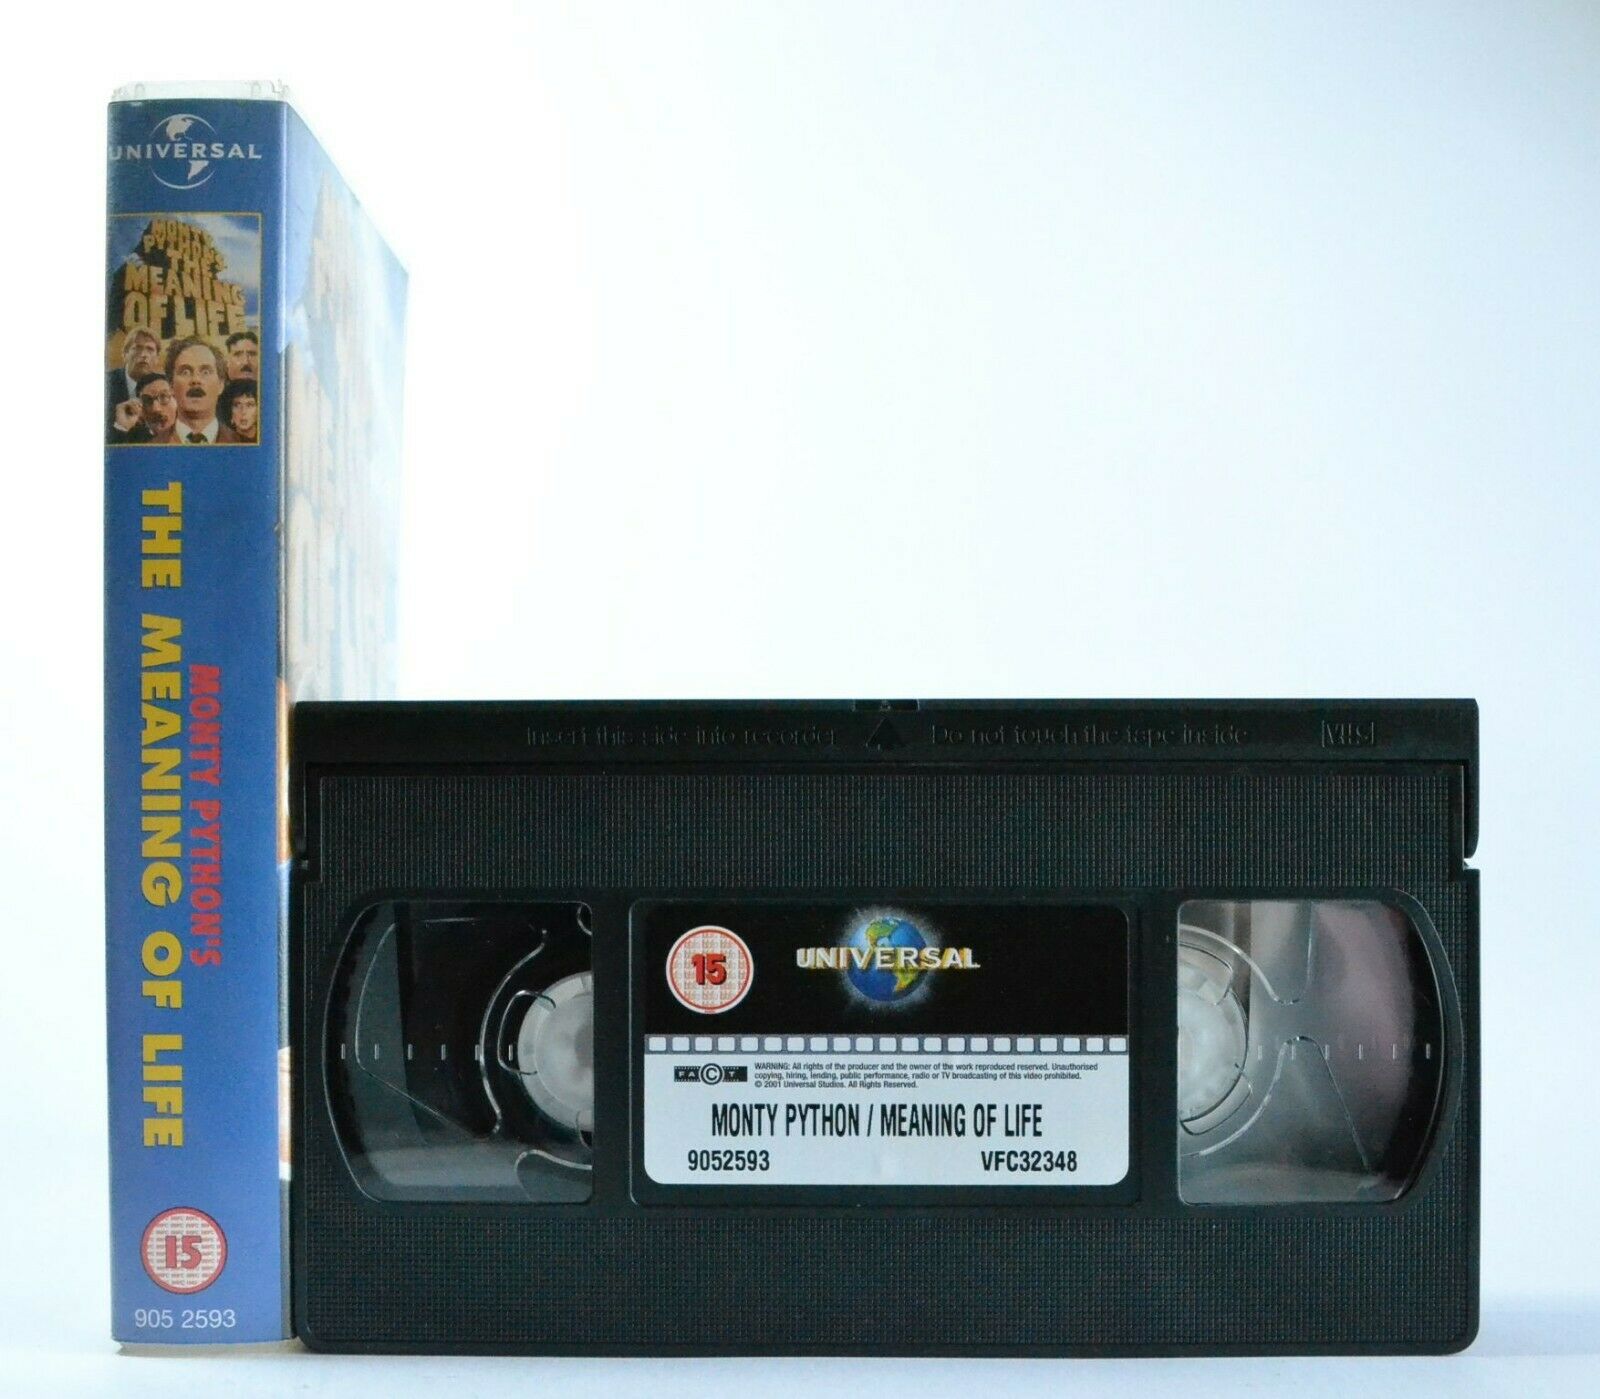 Monty Python's The Meaning Of Life: British Comedy Classic - J.Cleese - Pal VHS-